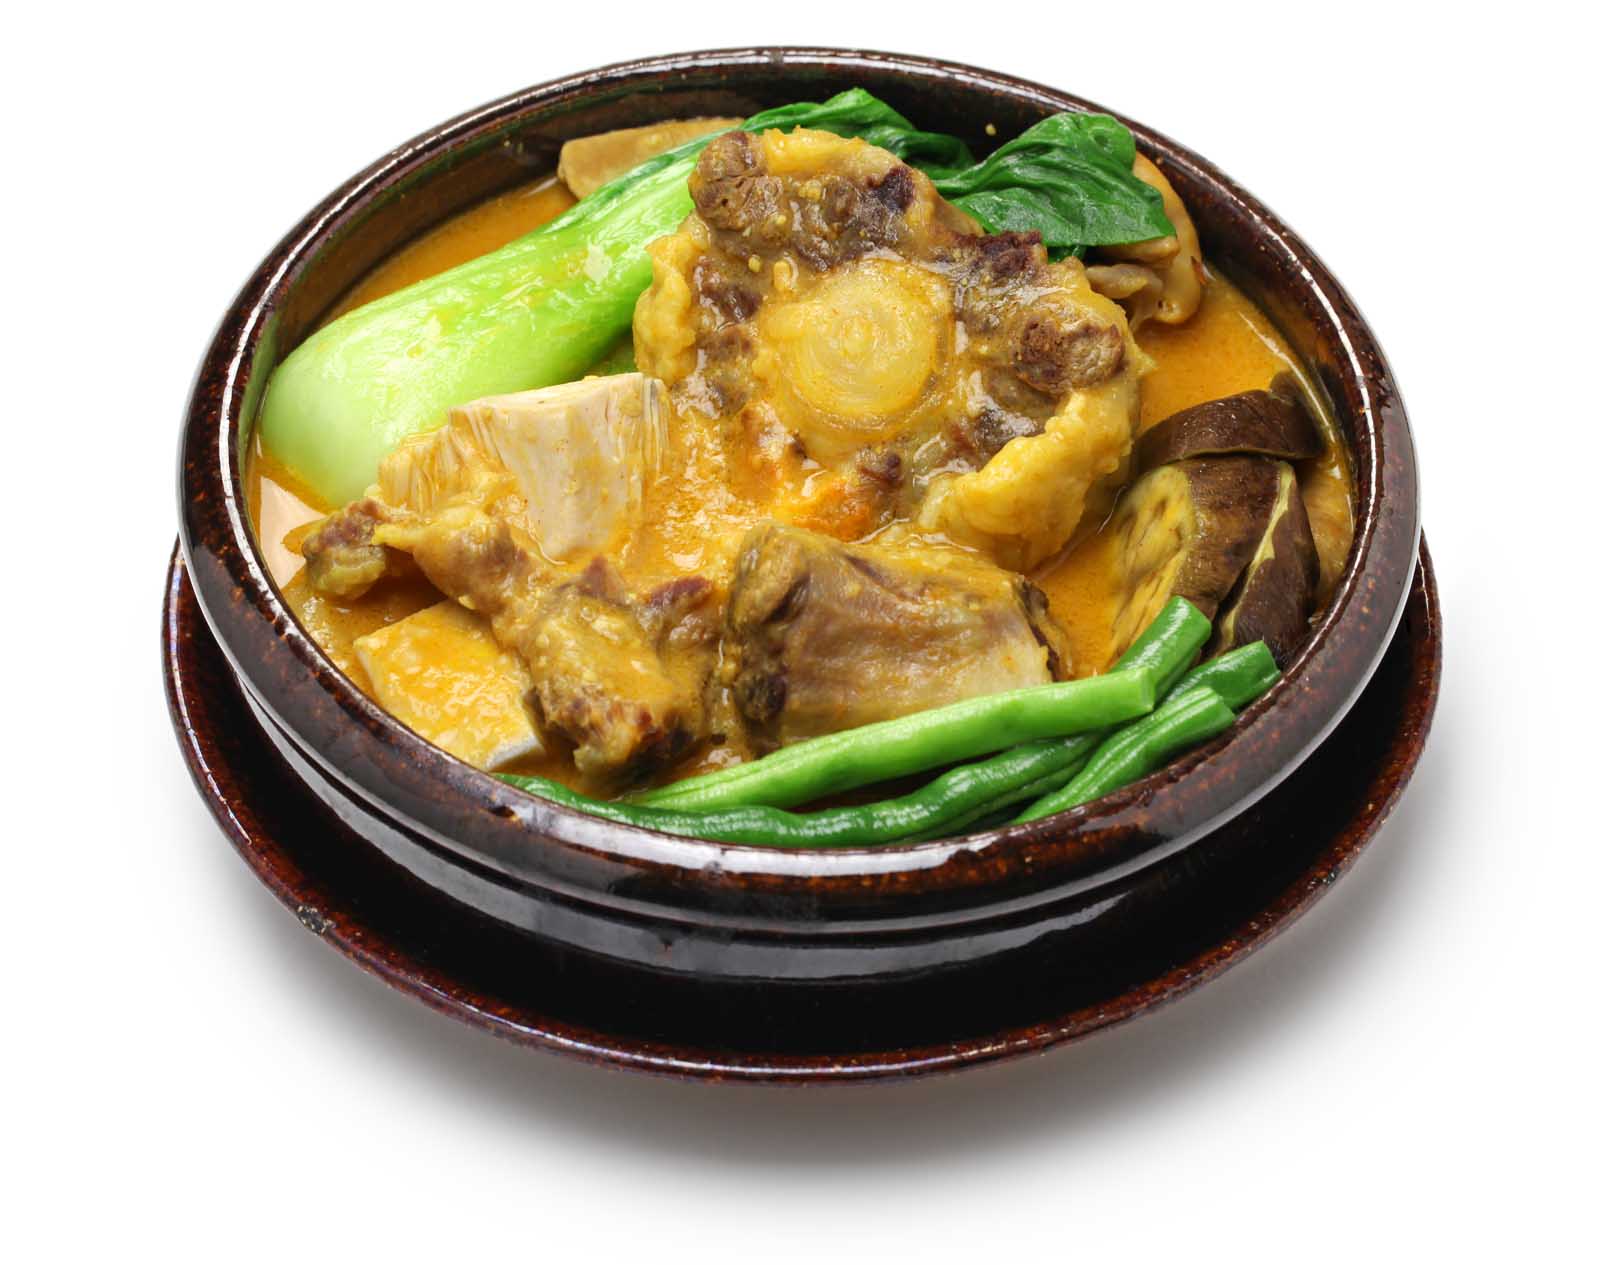 Kare-Kare Oxtail Stew Philippines Dishes